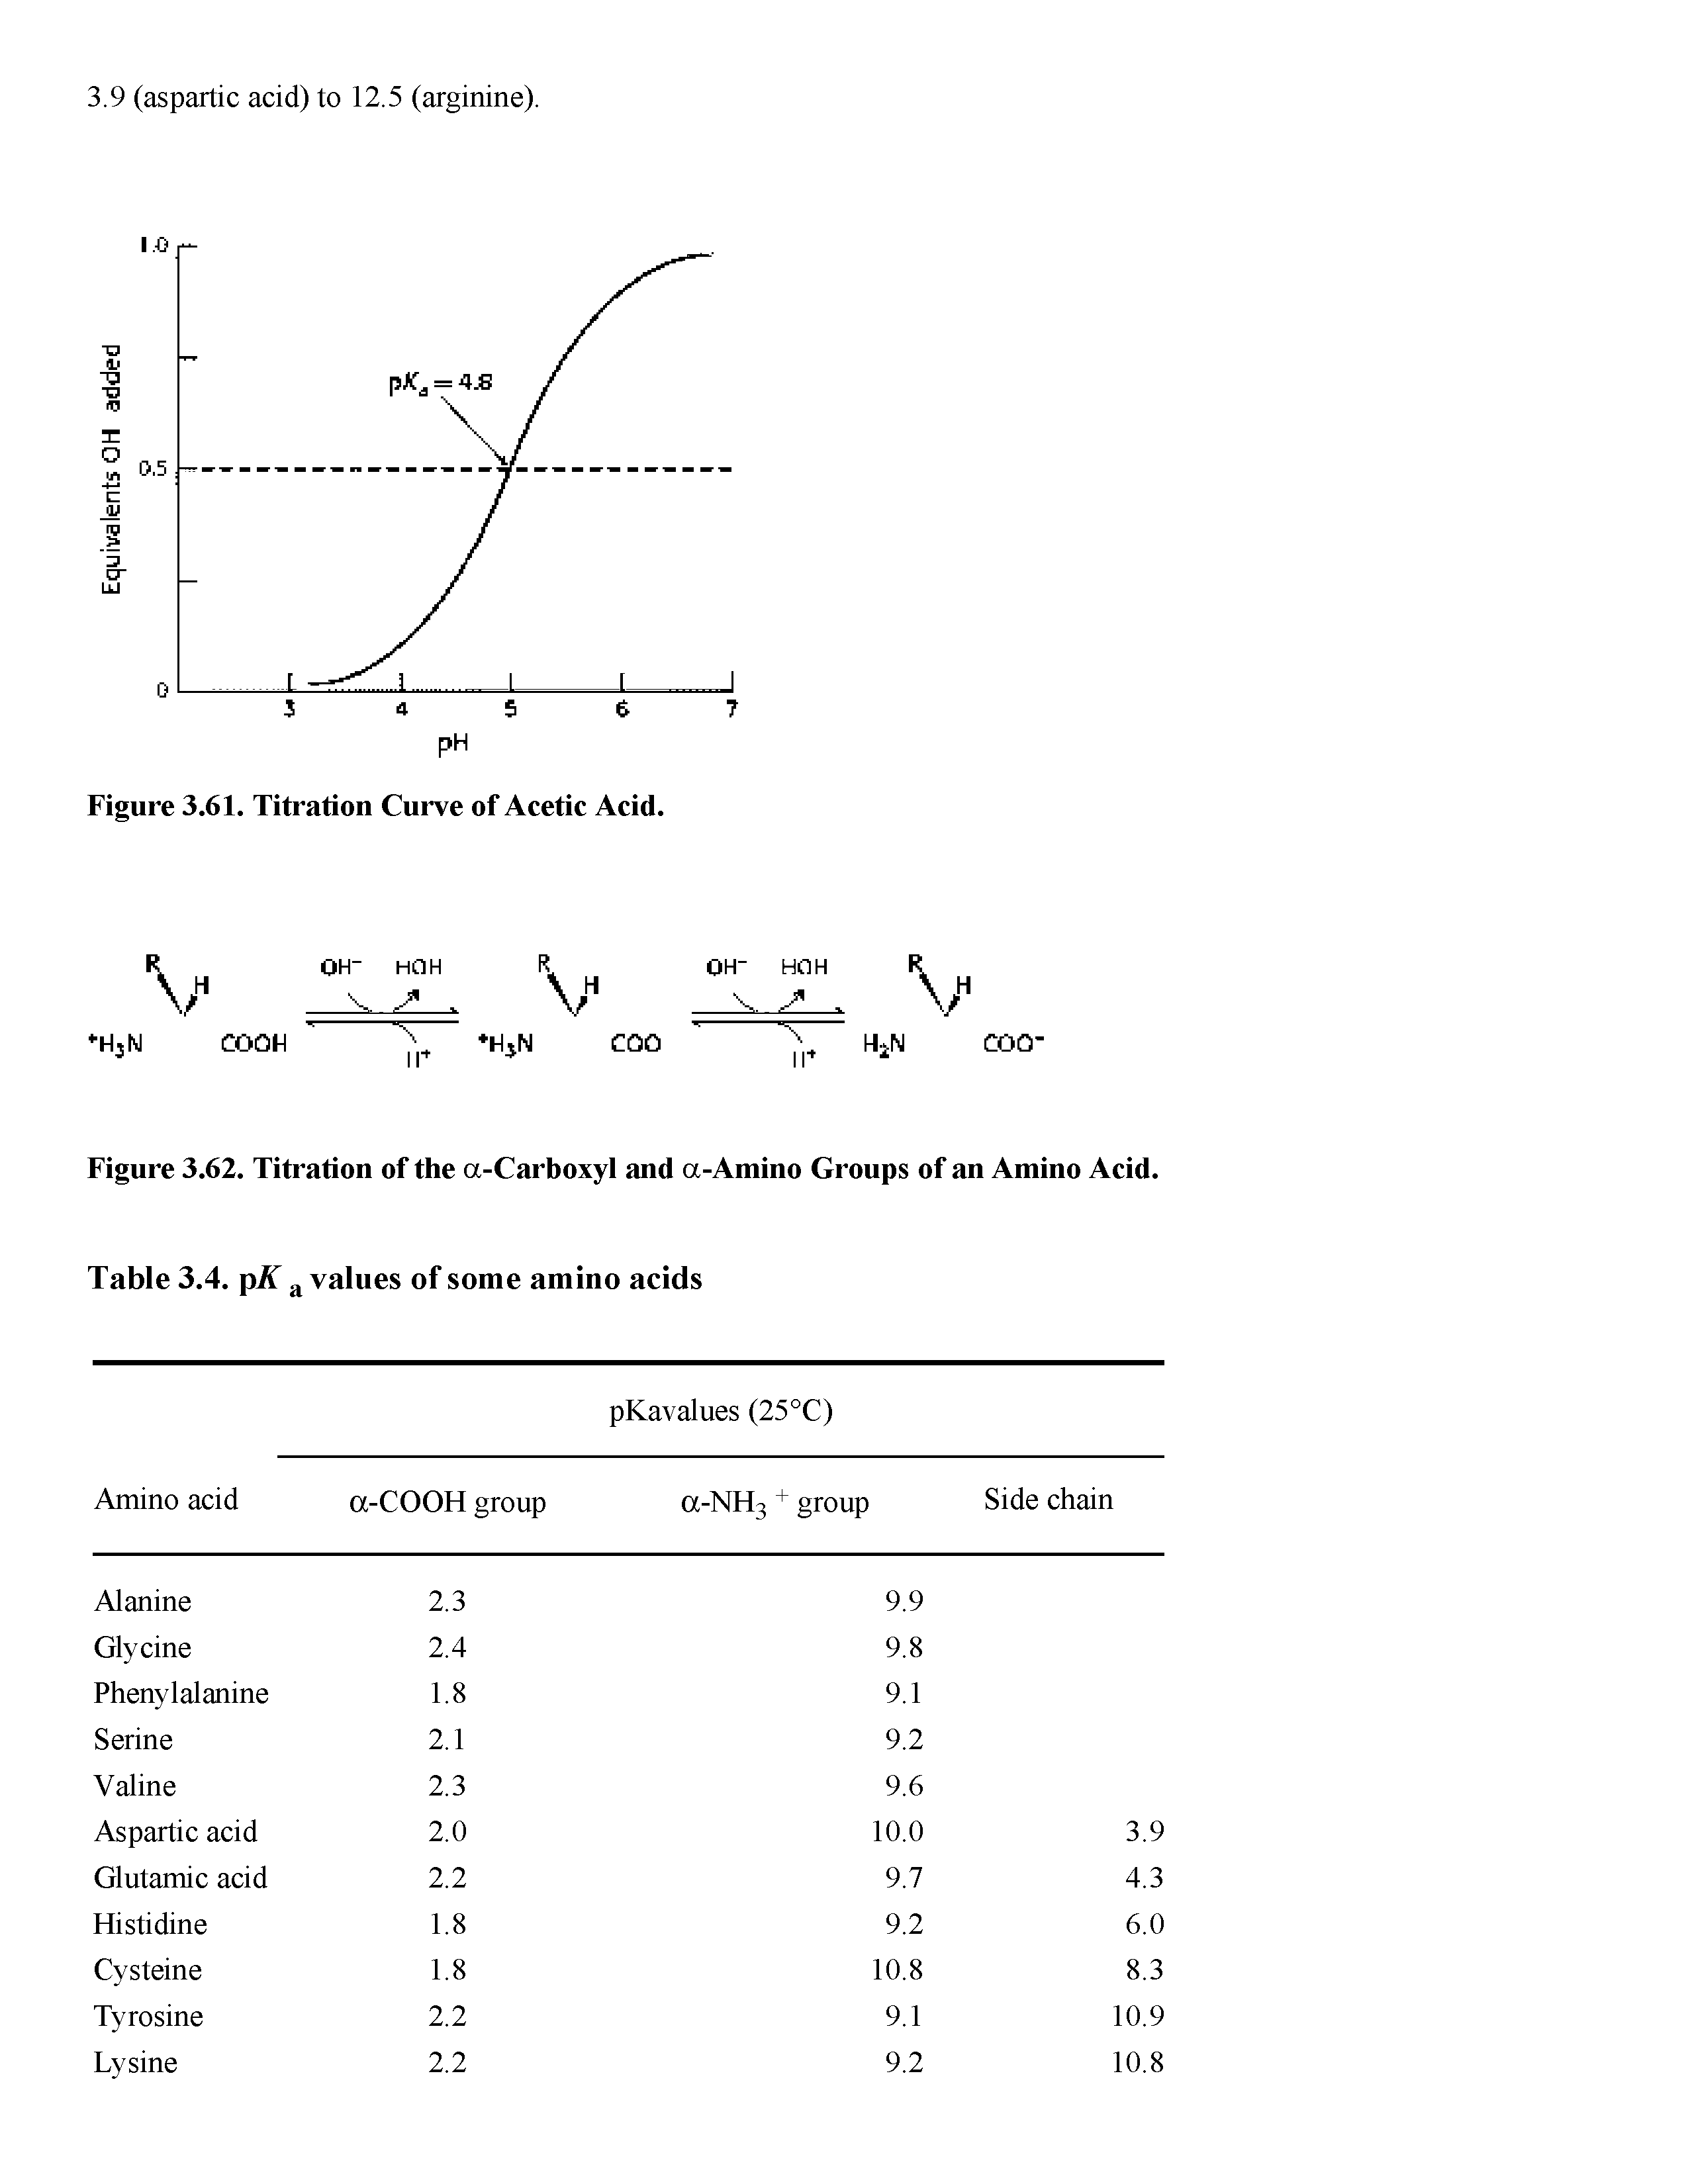 Figure 3.62. Titration of the a-Carboxyl and a-Amino Groups of an Amino Acid.